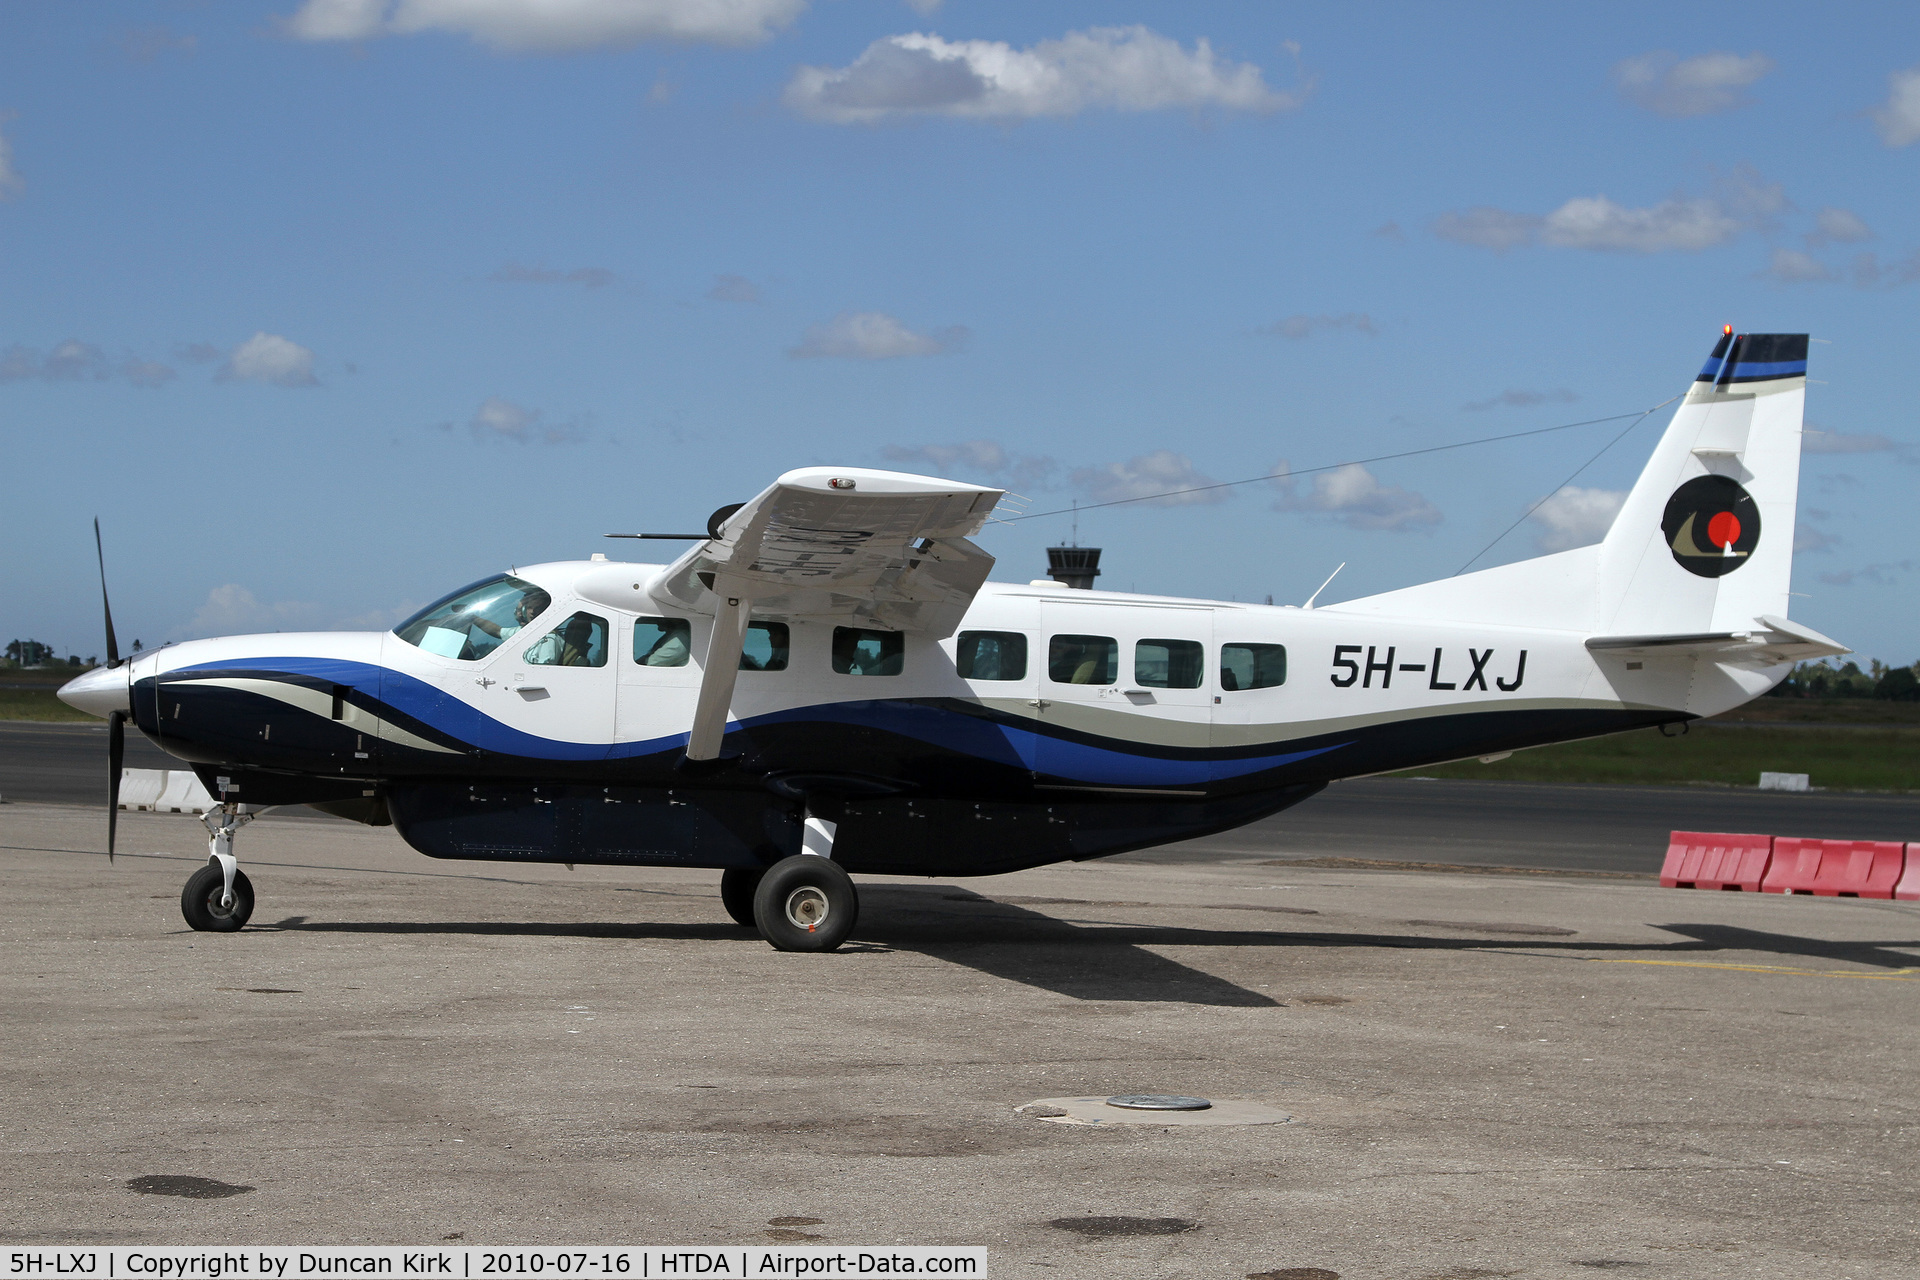 5H-LXJ, 2006 Cessna 208B Grand Caravan C/N 208B1230, Taxiing out this aircraft is leased to Coastal